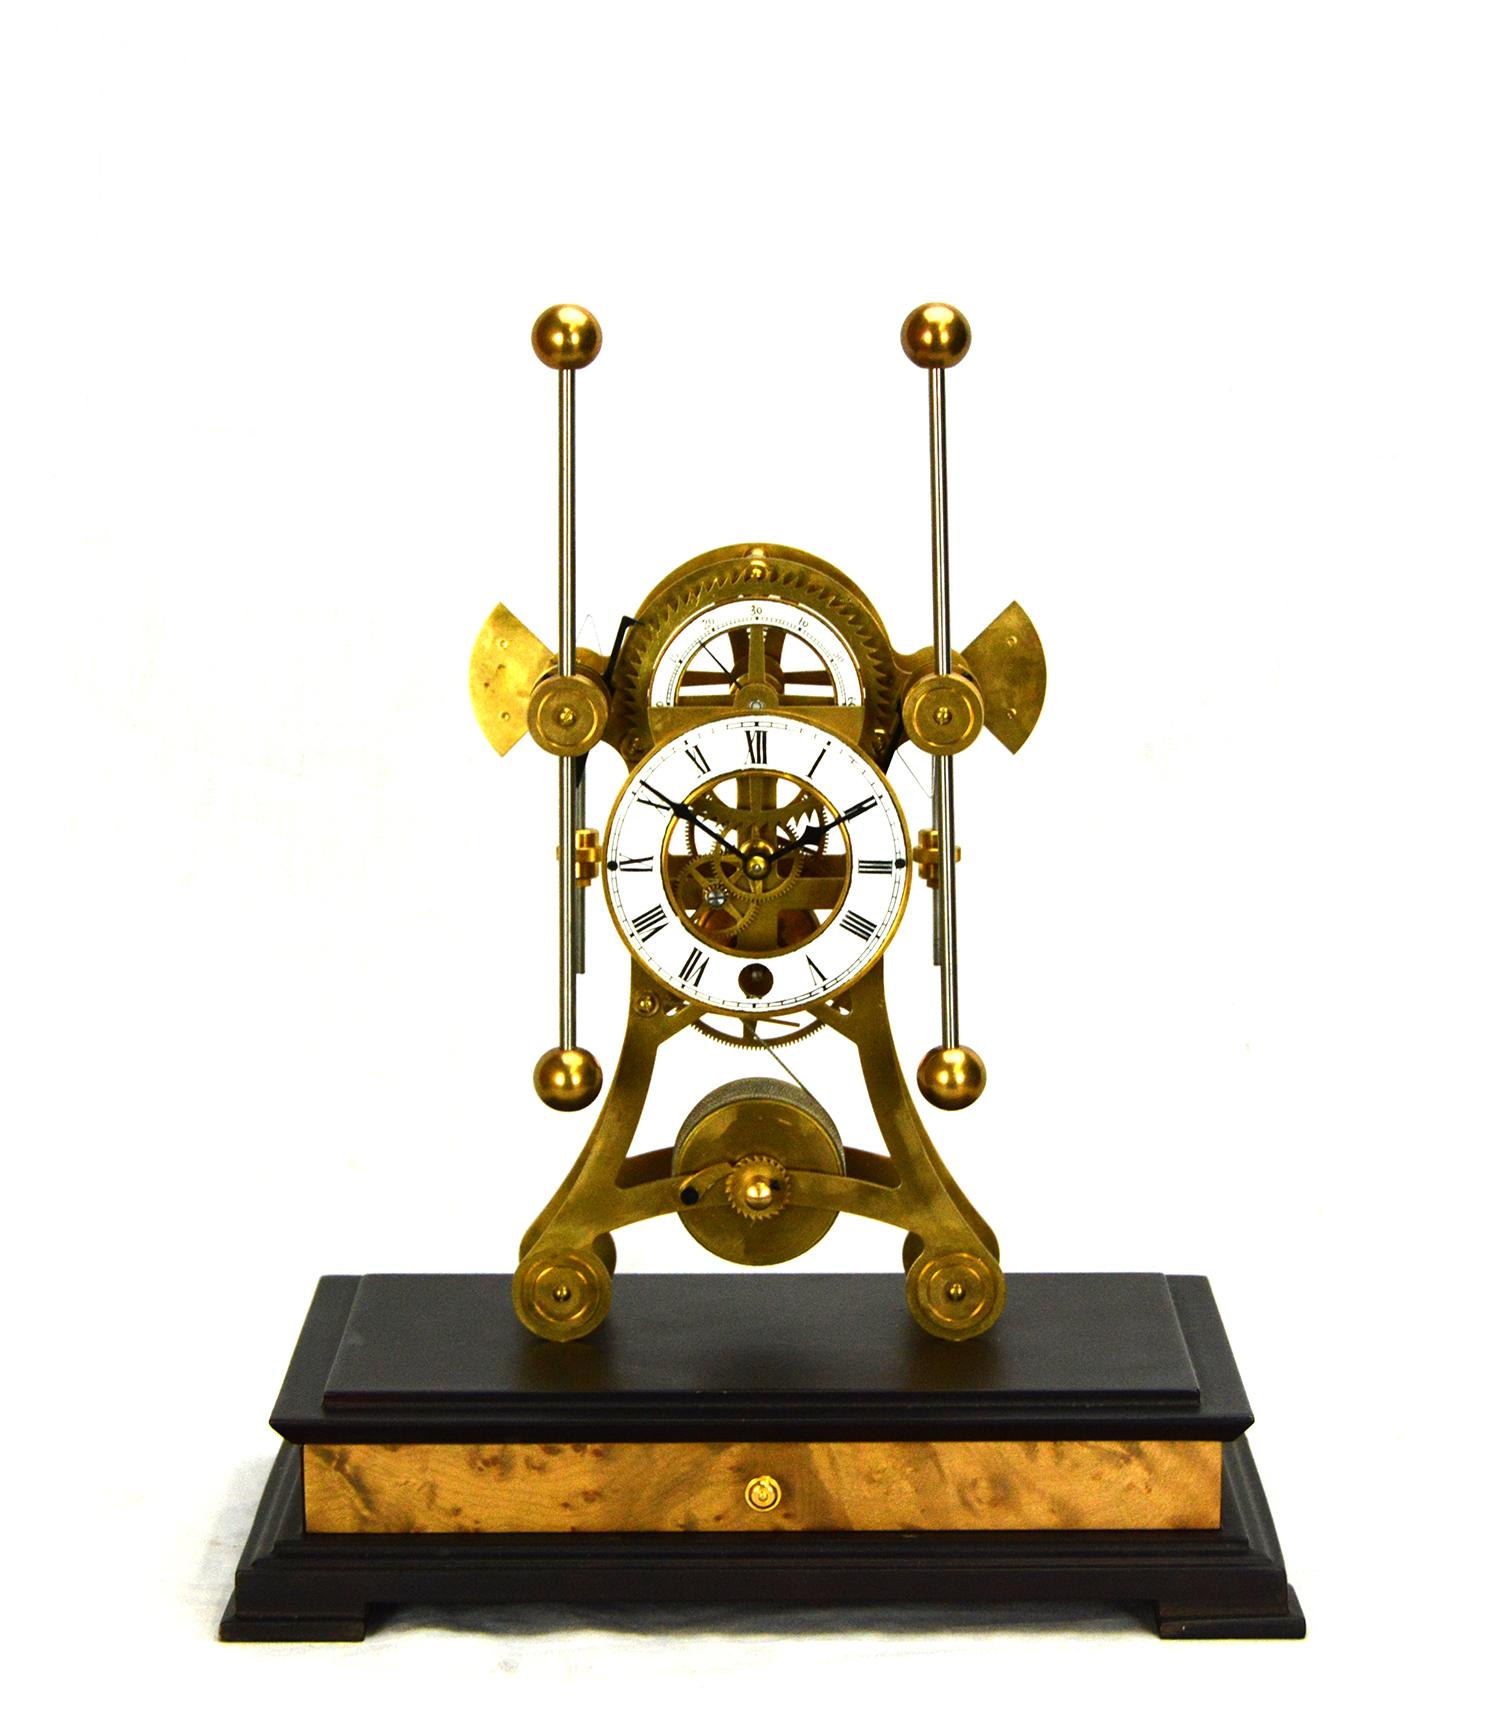 Contemporary English Style Grasshopper Escapement 8 Day Fusee Double Pendulum Mantle Clock